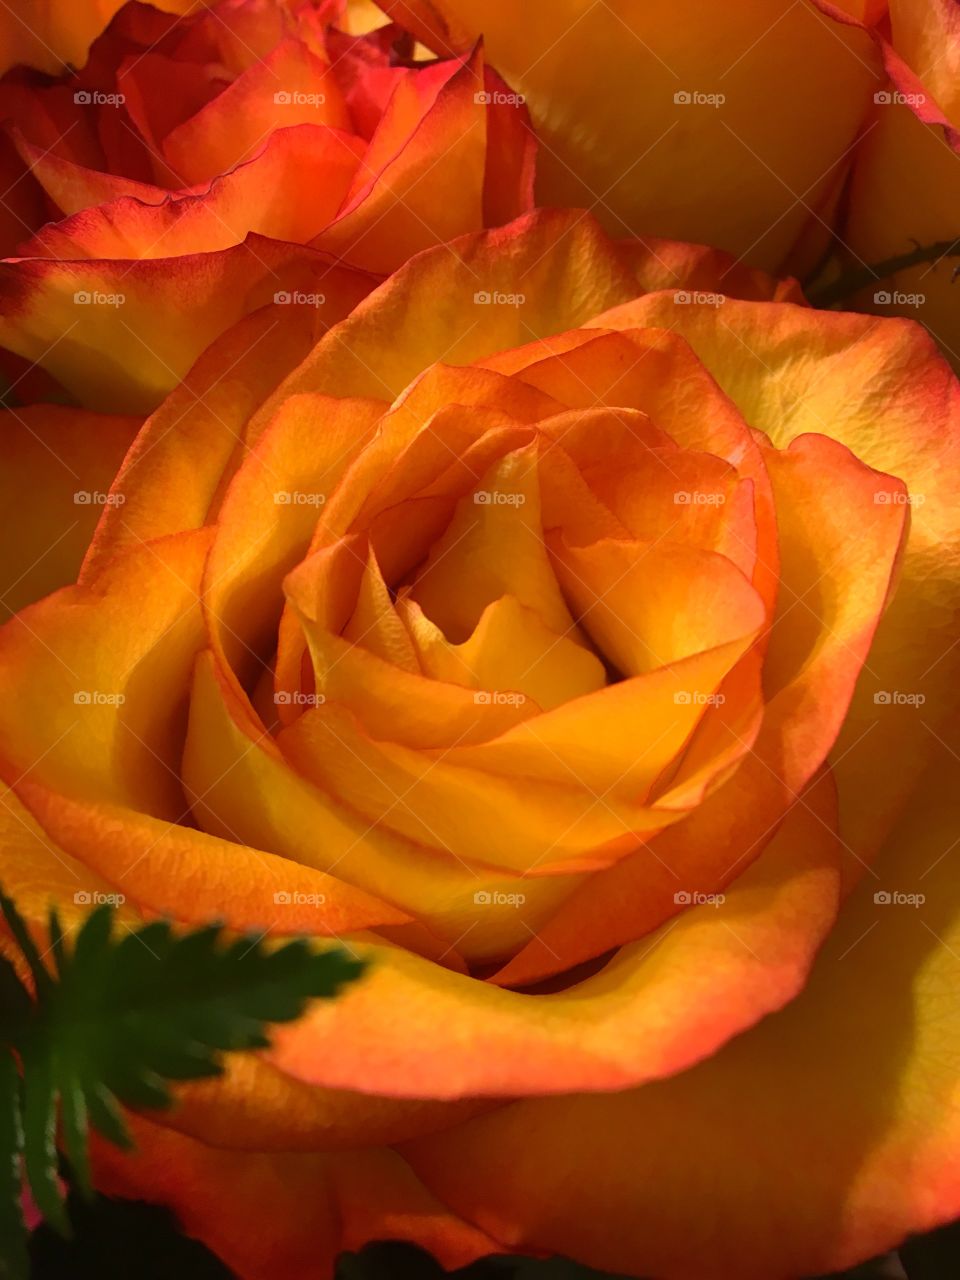 The most beautiful flowers in universe - roses.